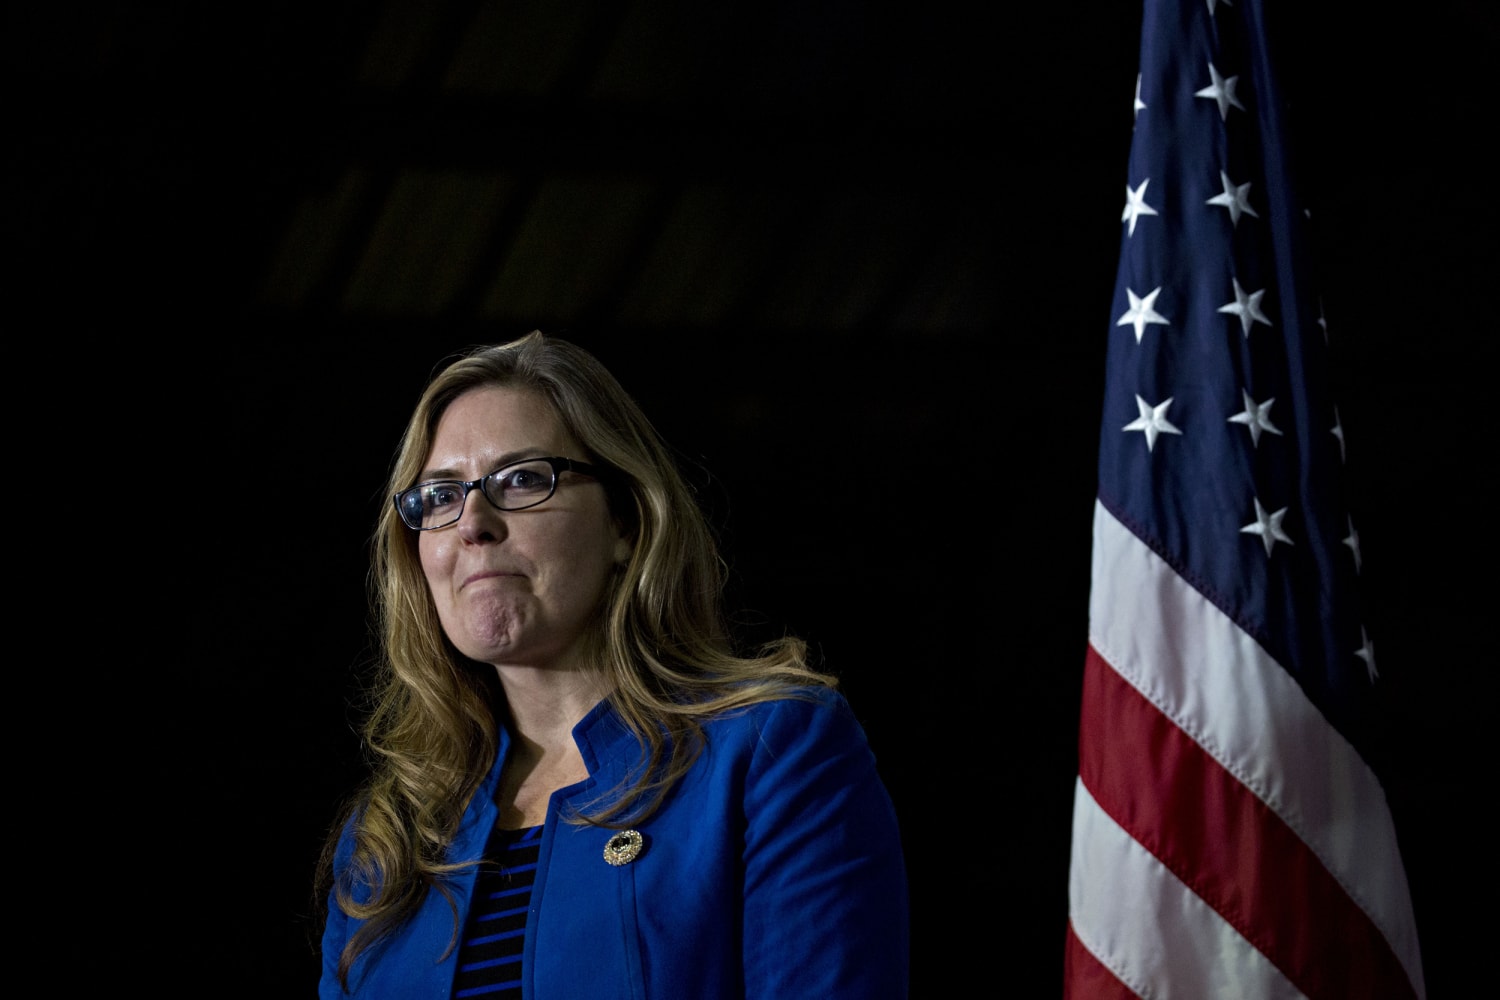 Rep. Jennifer Wexton won’t seek reelection after diagnosis for progressive supranuclear palsy